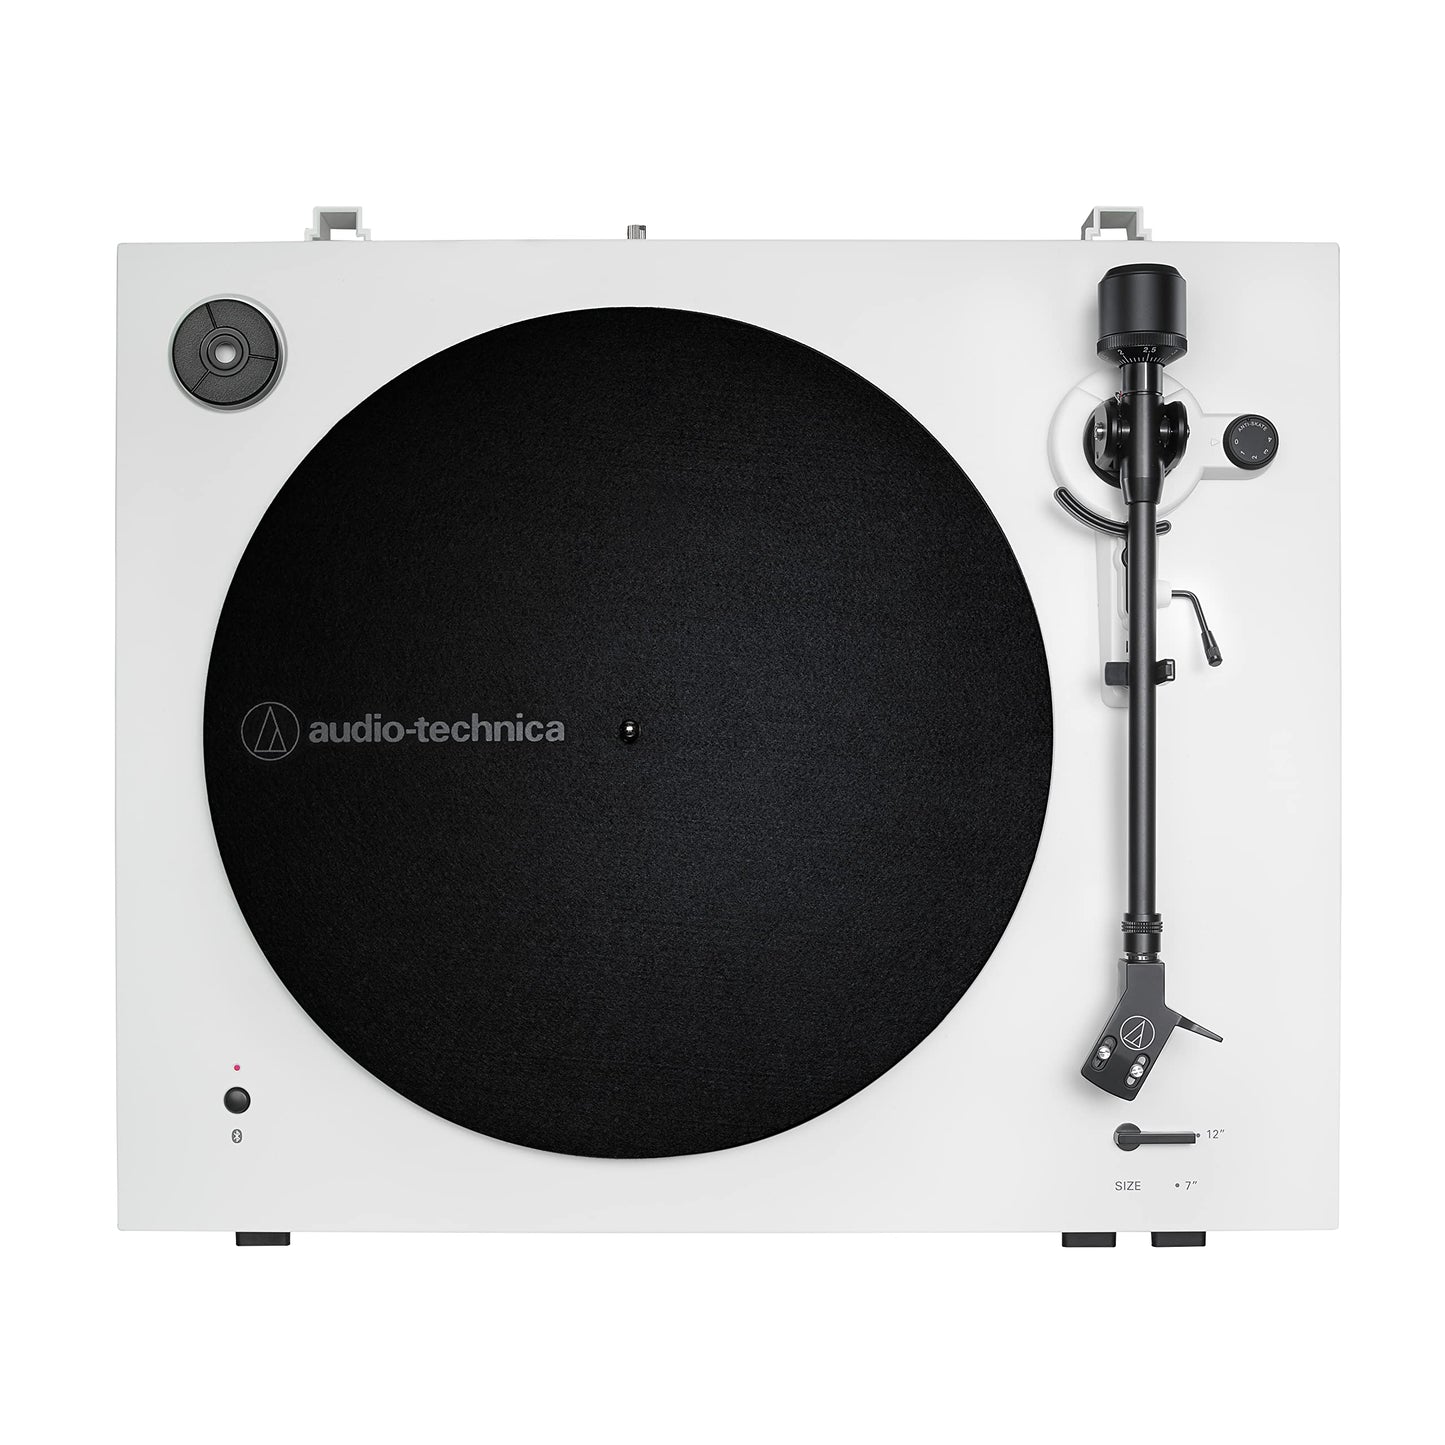 Audio-Technica Audio Technica AT-LP3XBT-WH Bluetooth Turntable Belt Drive 33/45 (White)